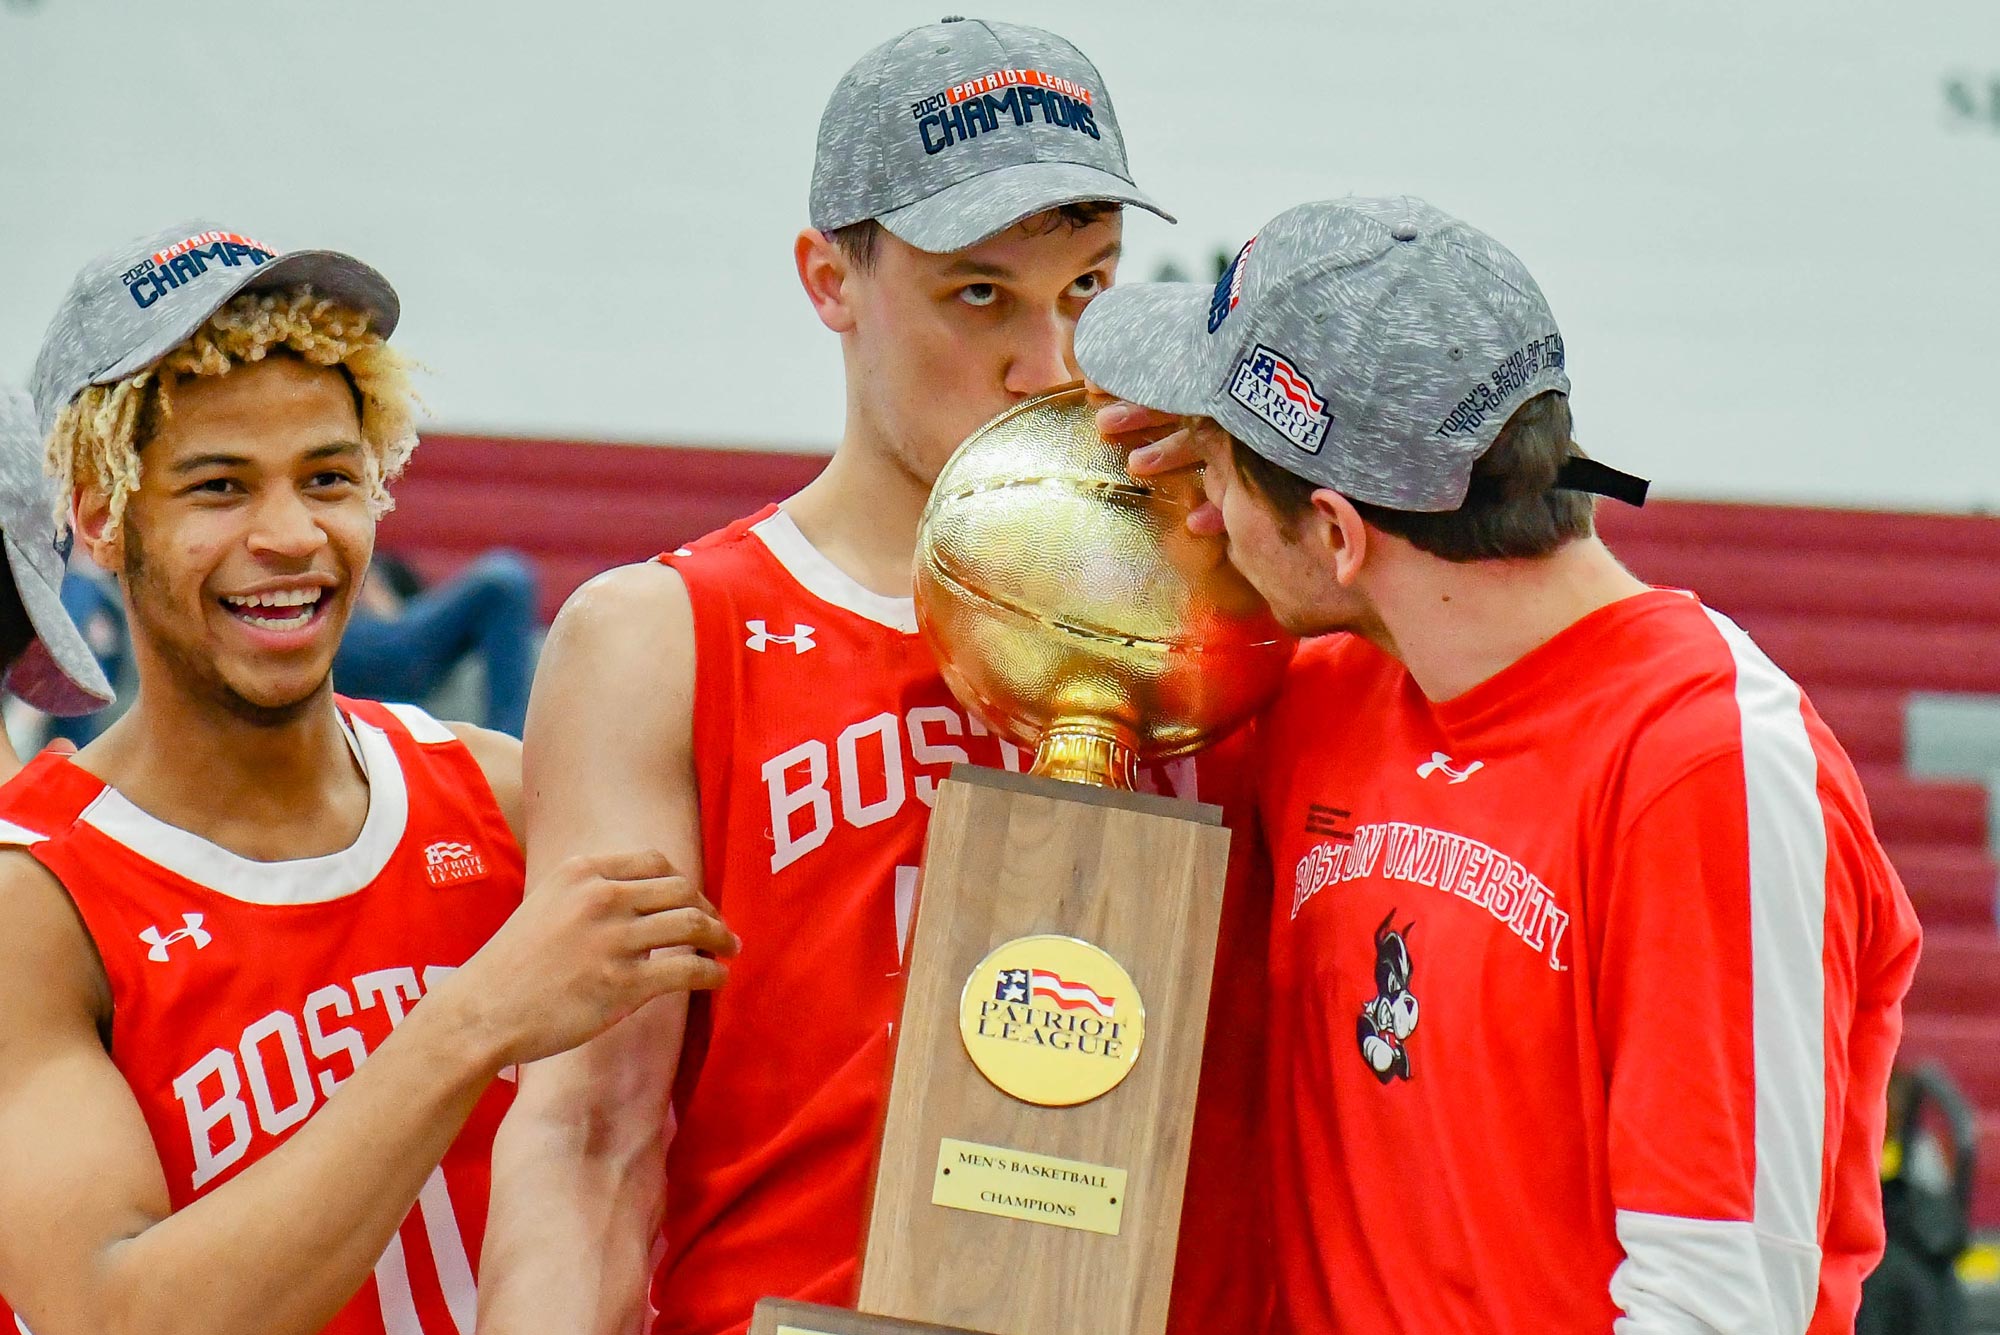 Tournament Canceled, but Title in Hand, BU Mens Basketball Players Bask in Moment BU Today Boston University picture